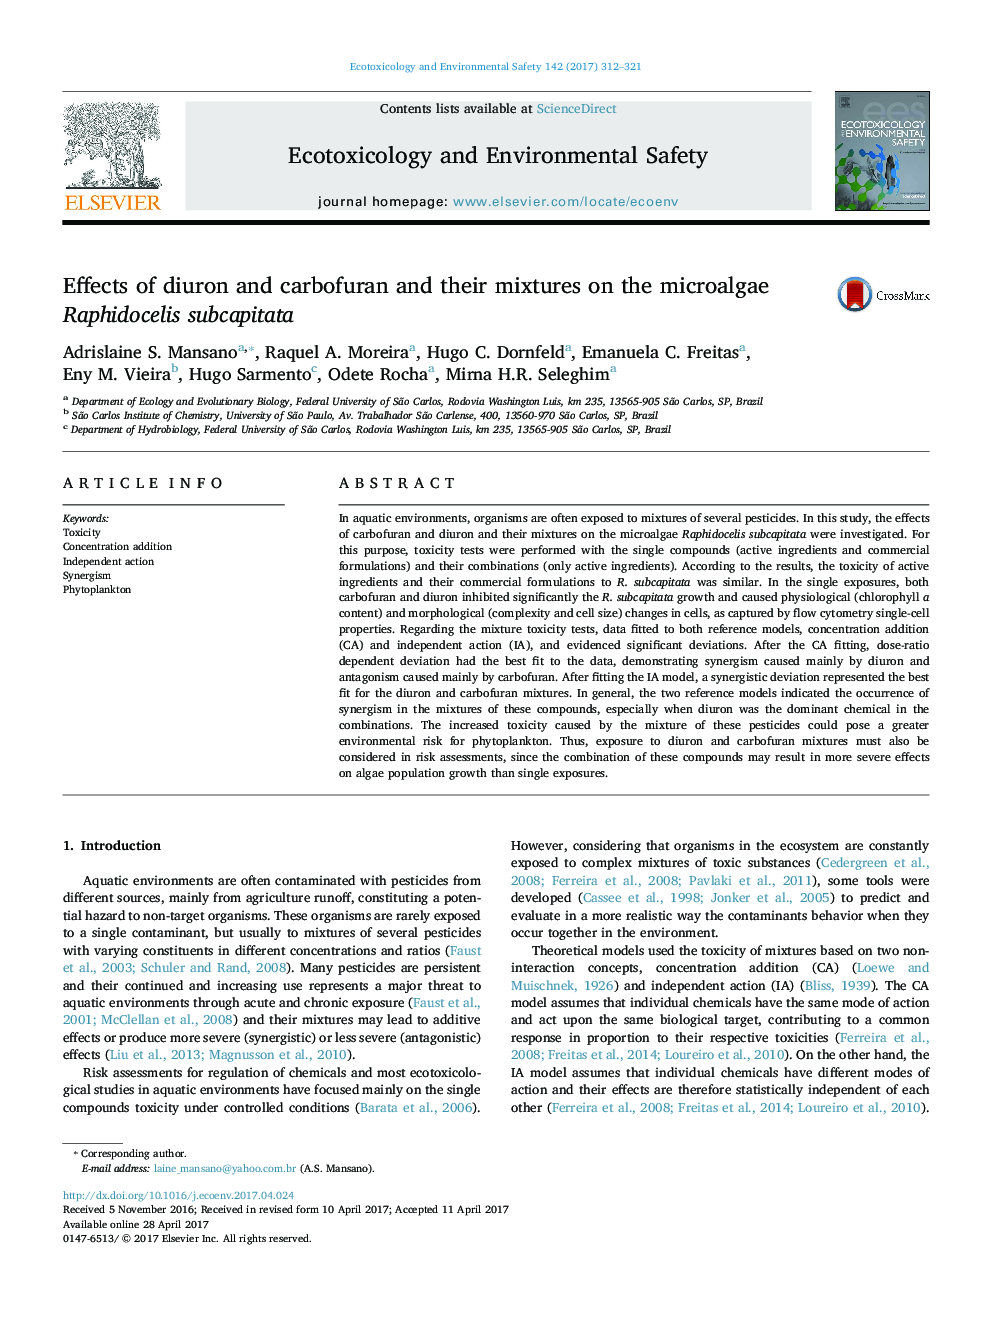 Effects of diuron and carbofuran and their mixtures on the microalgae Raphidocelis subcapitata